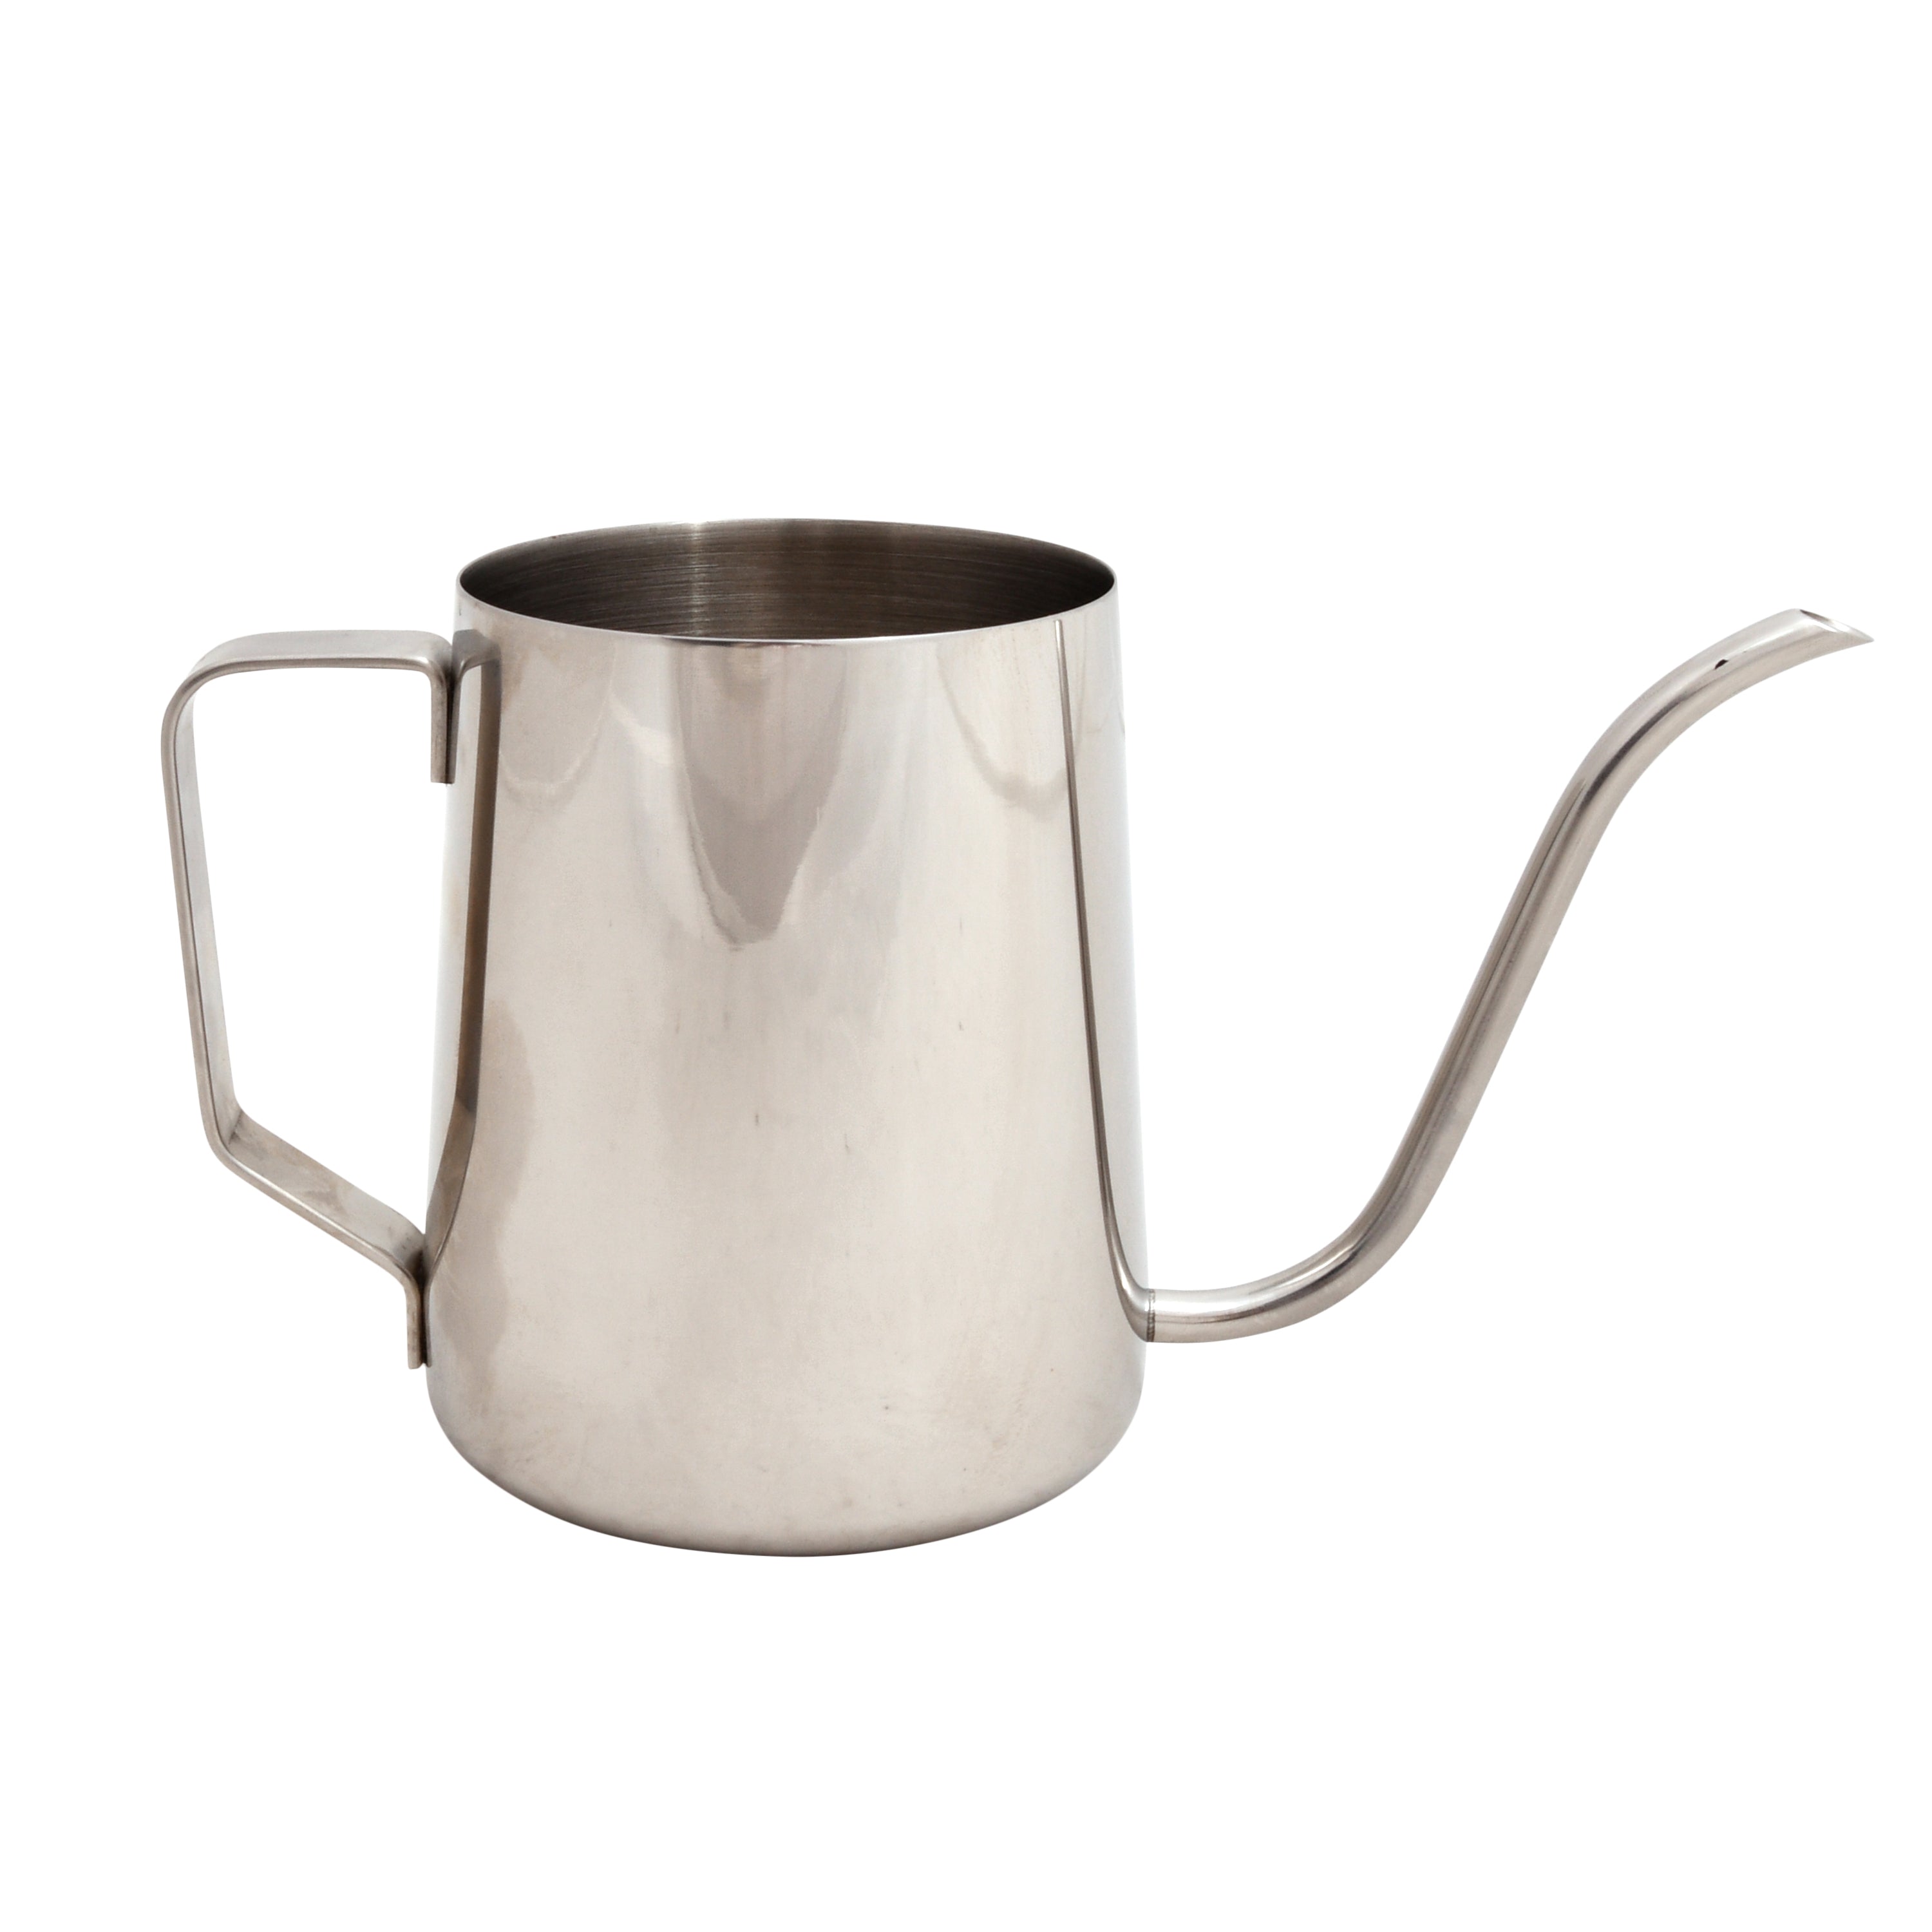 Small indoor stainless steel watering can for house plants